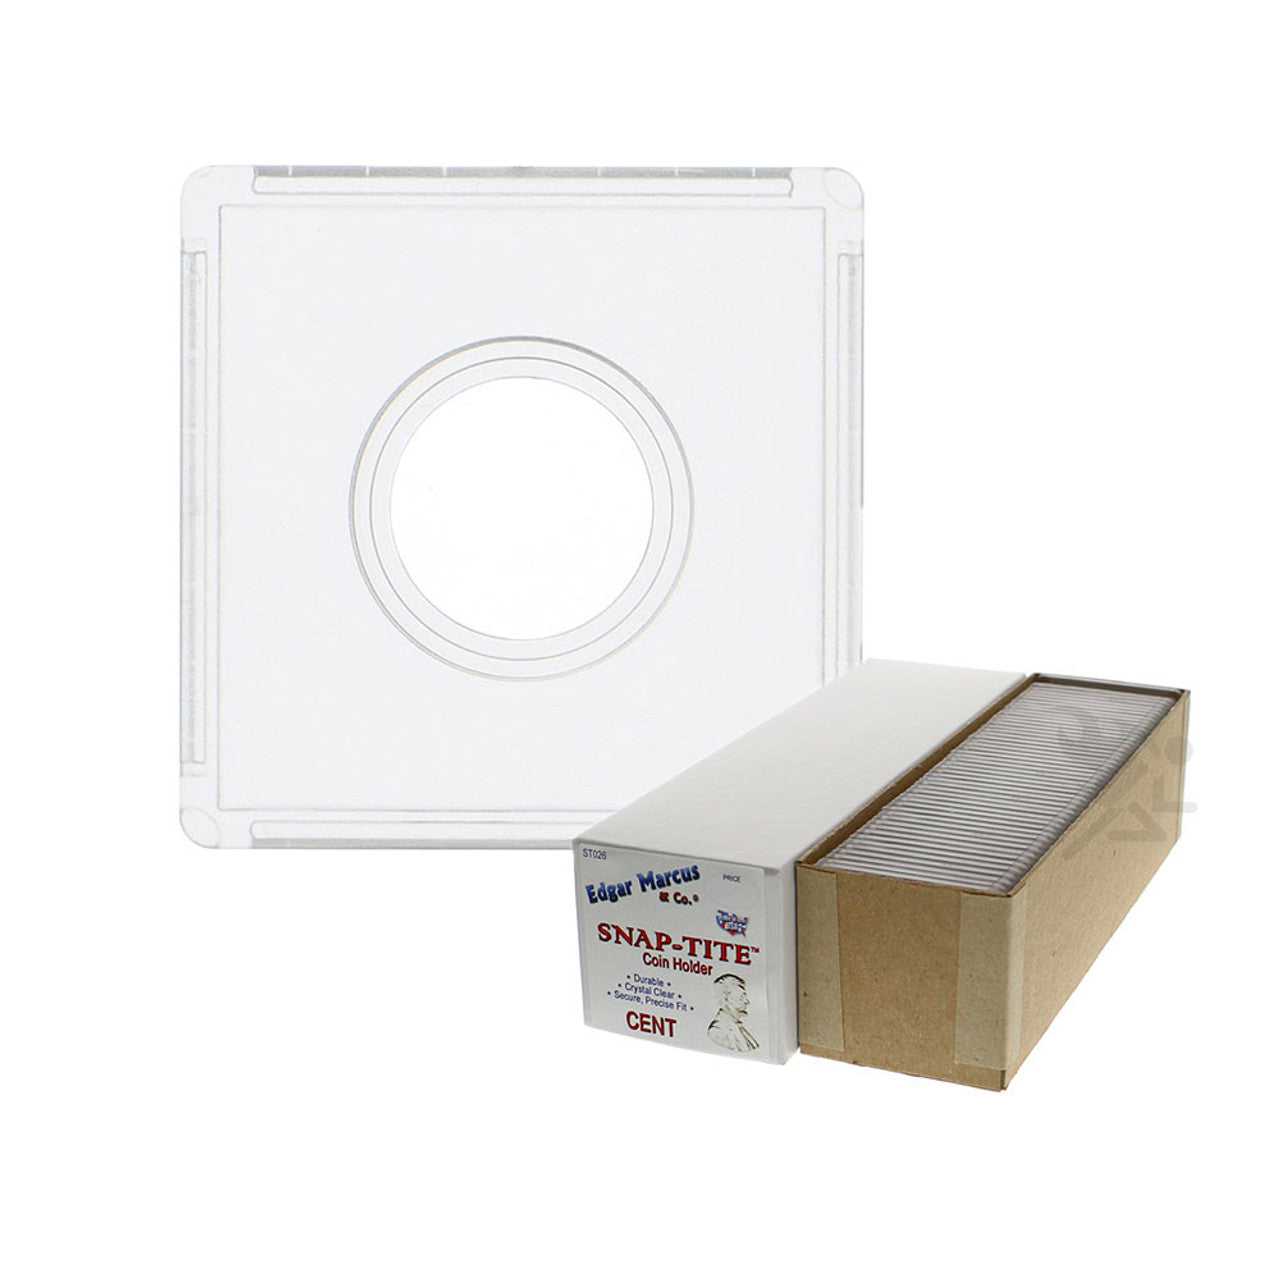 Snap-Tite 2x2 Plastic Coin Holders for Penny/Cent, 25 ct Box